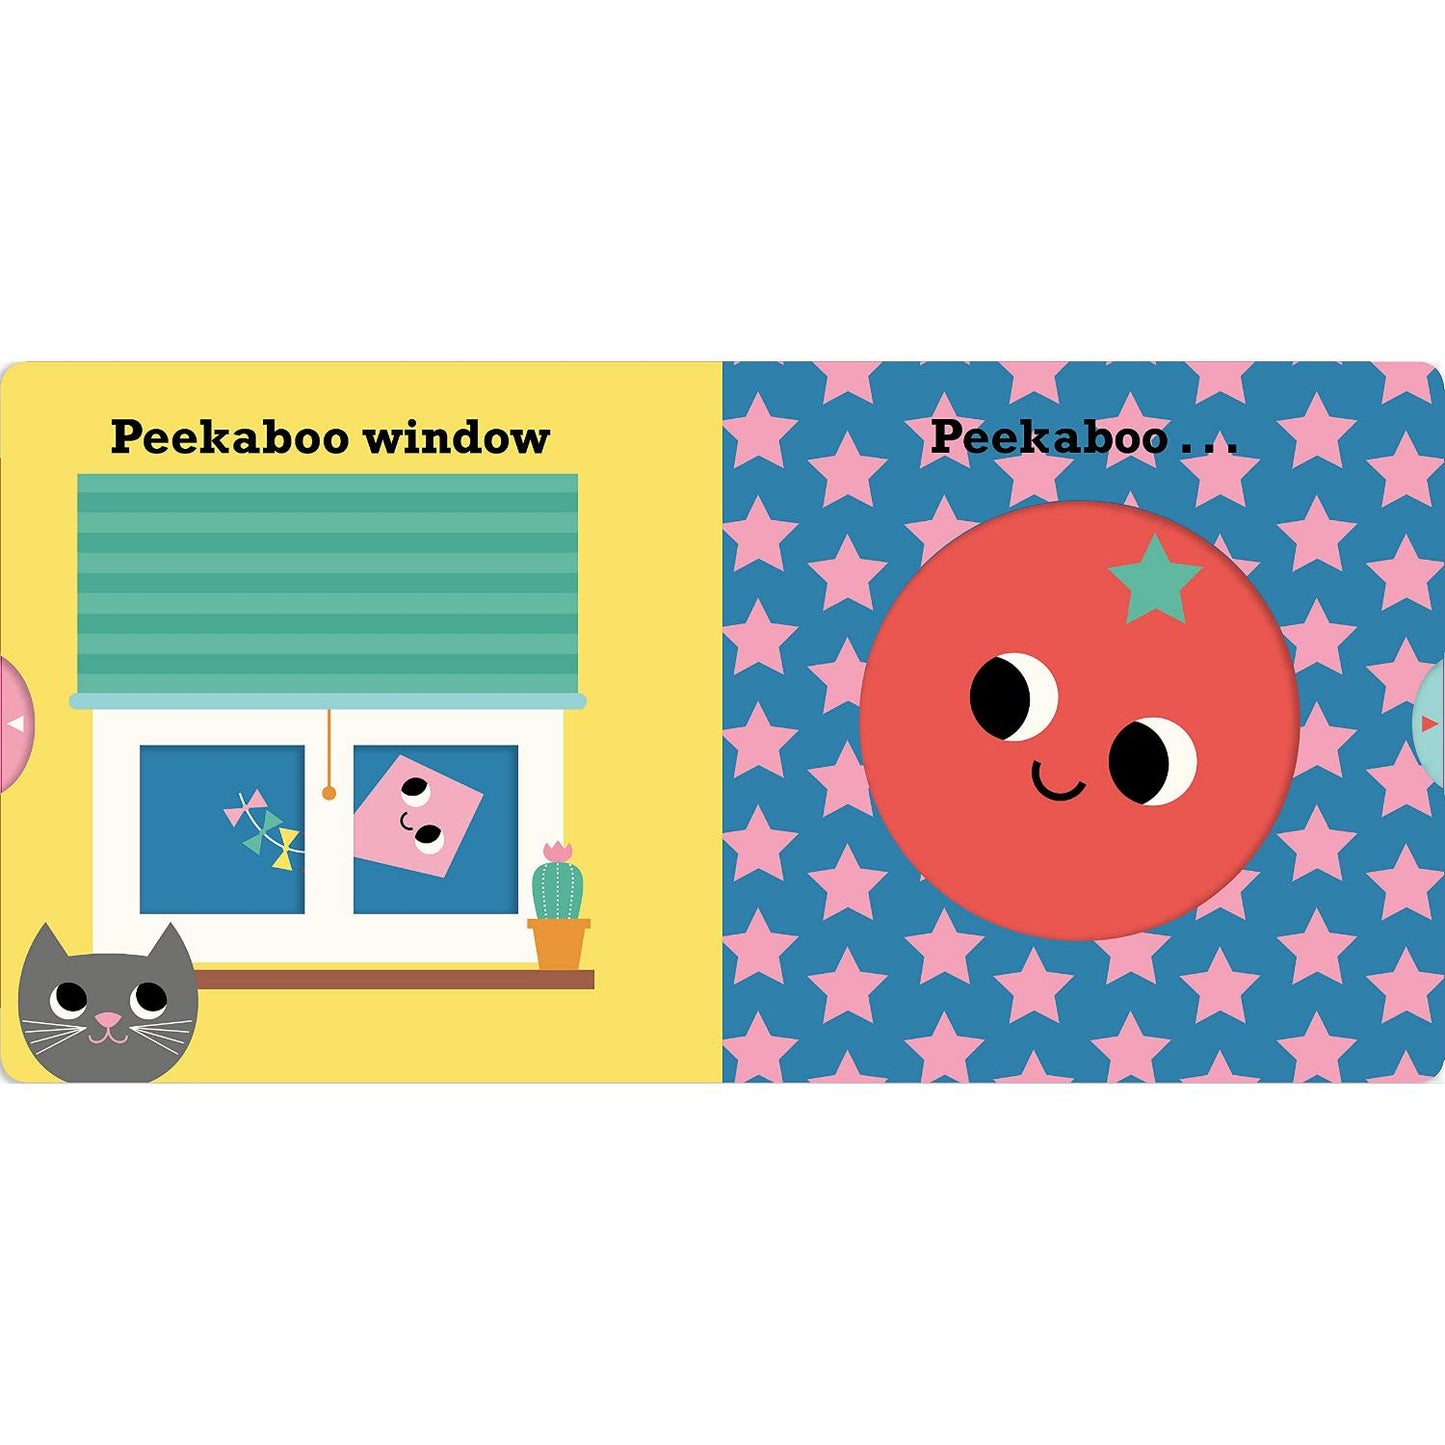 Peekaboo House | Interactive Board Book for Babies & Toddlers